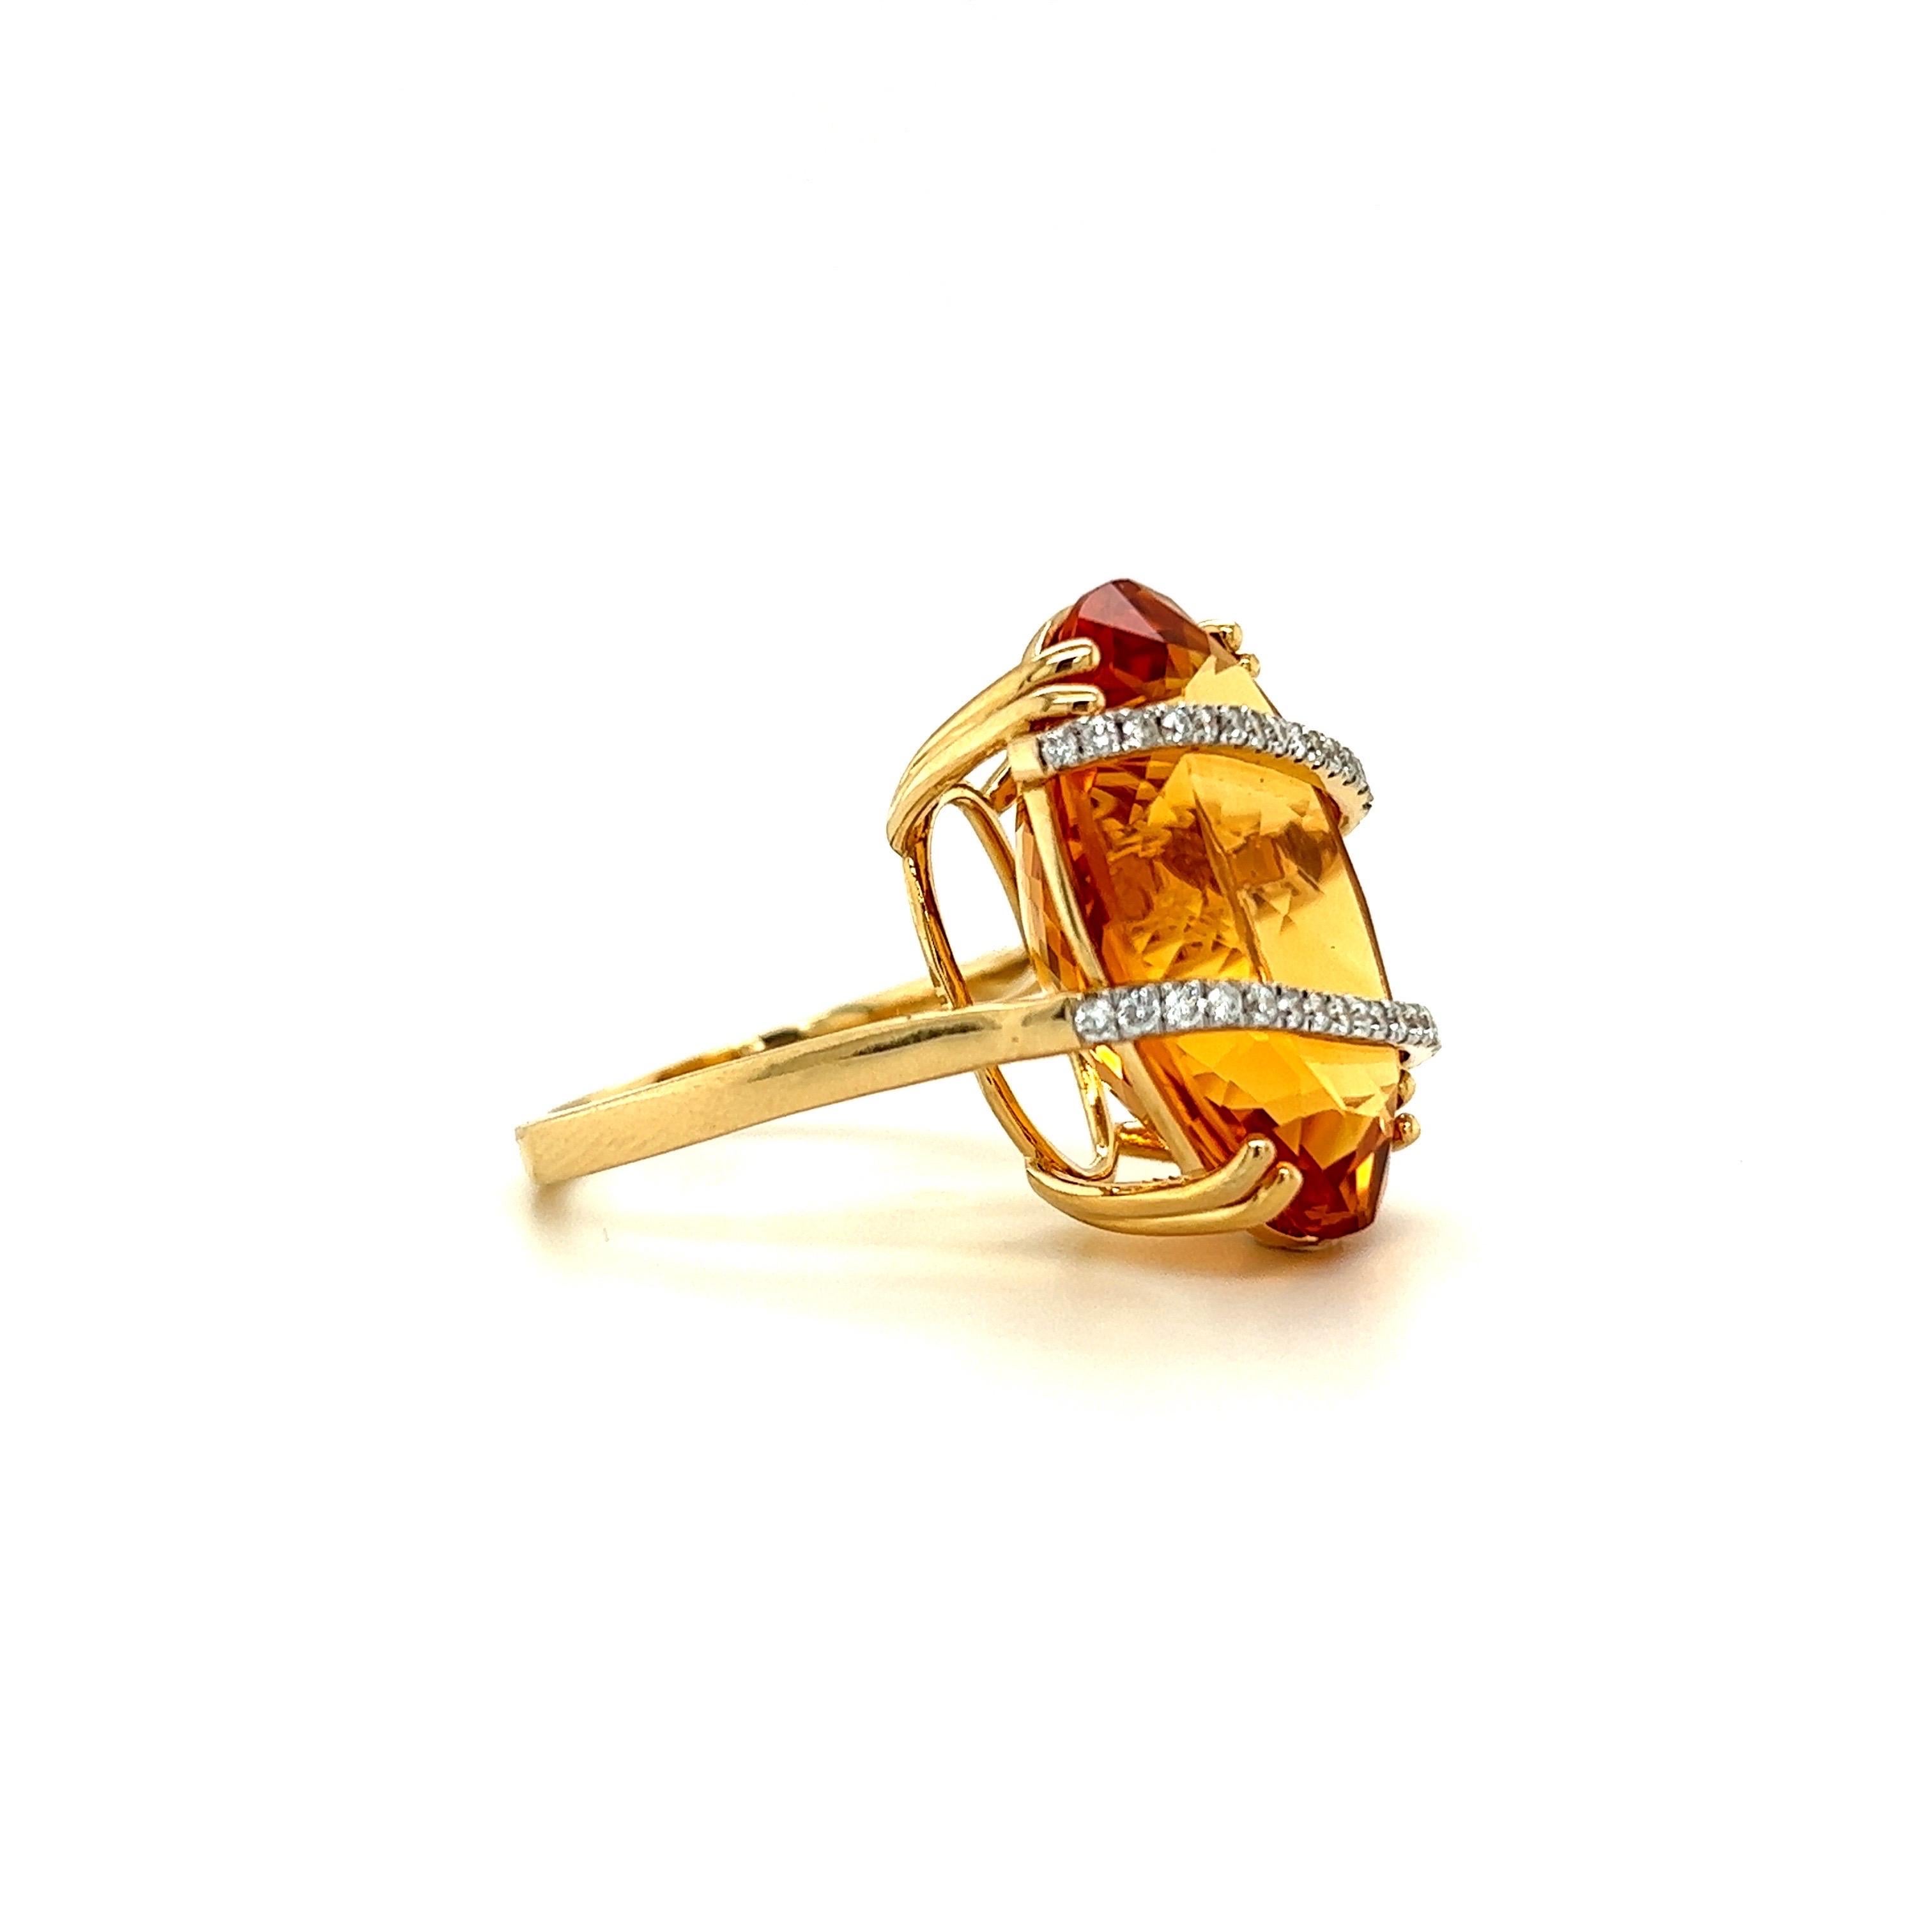 Elegant citrine ring. High Brilliance, rich golden honey tone, transparent clean, oval shape faceted, 18.12 carats natural citrine mounted in high profile basket with eight bead prongs, accented with round brilliant cut diamonds. Handcrafted design